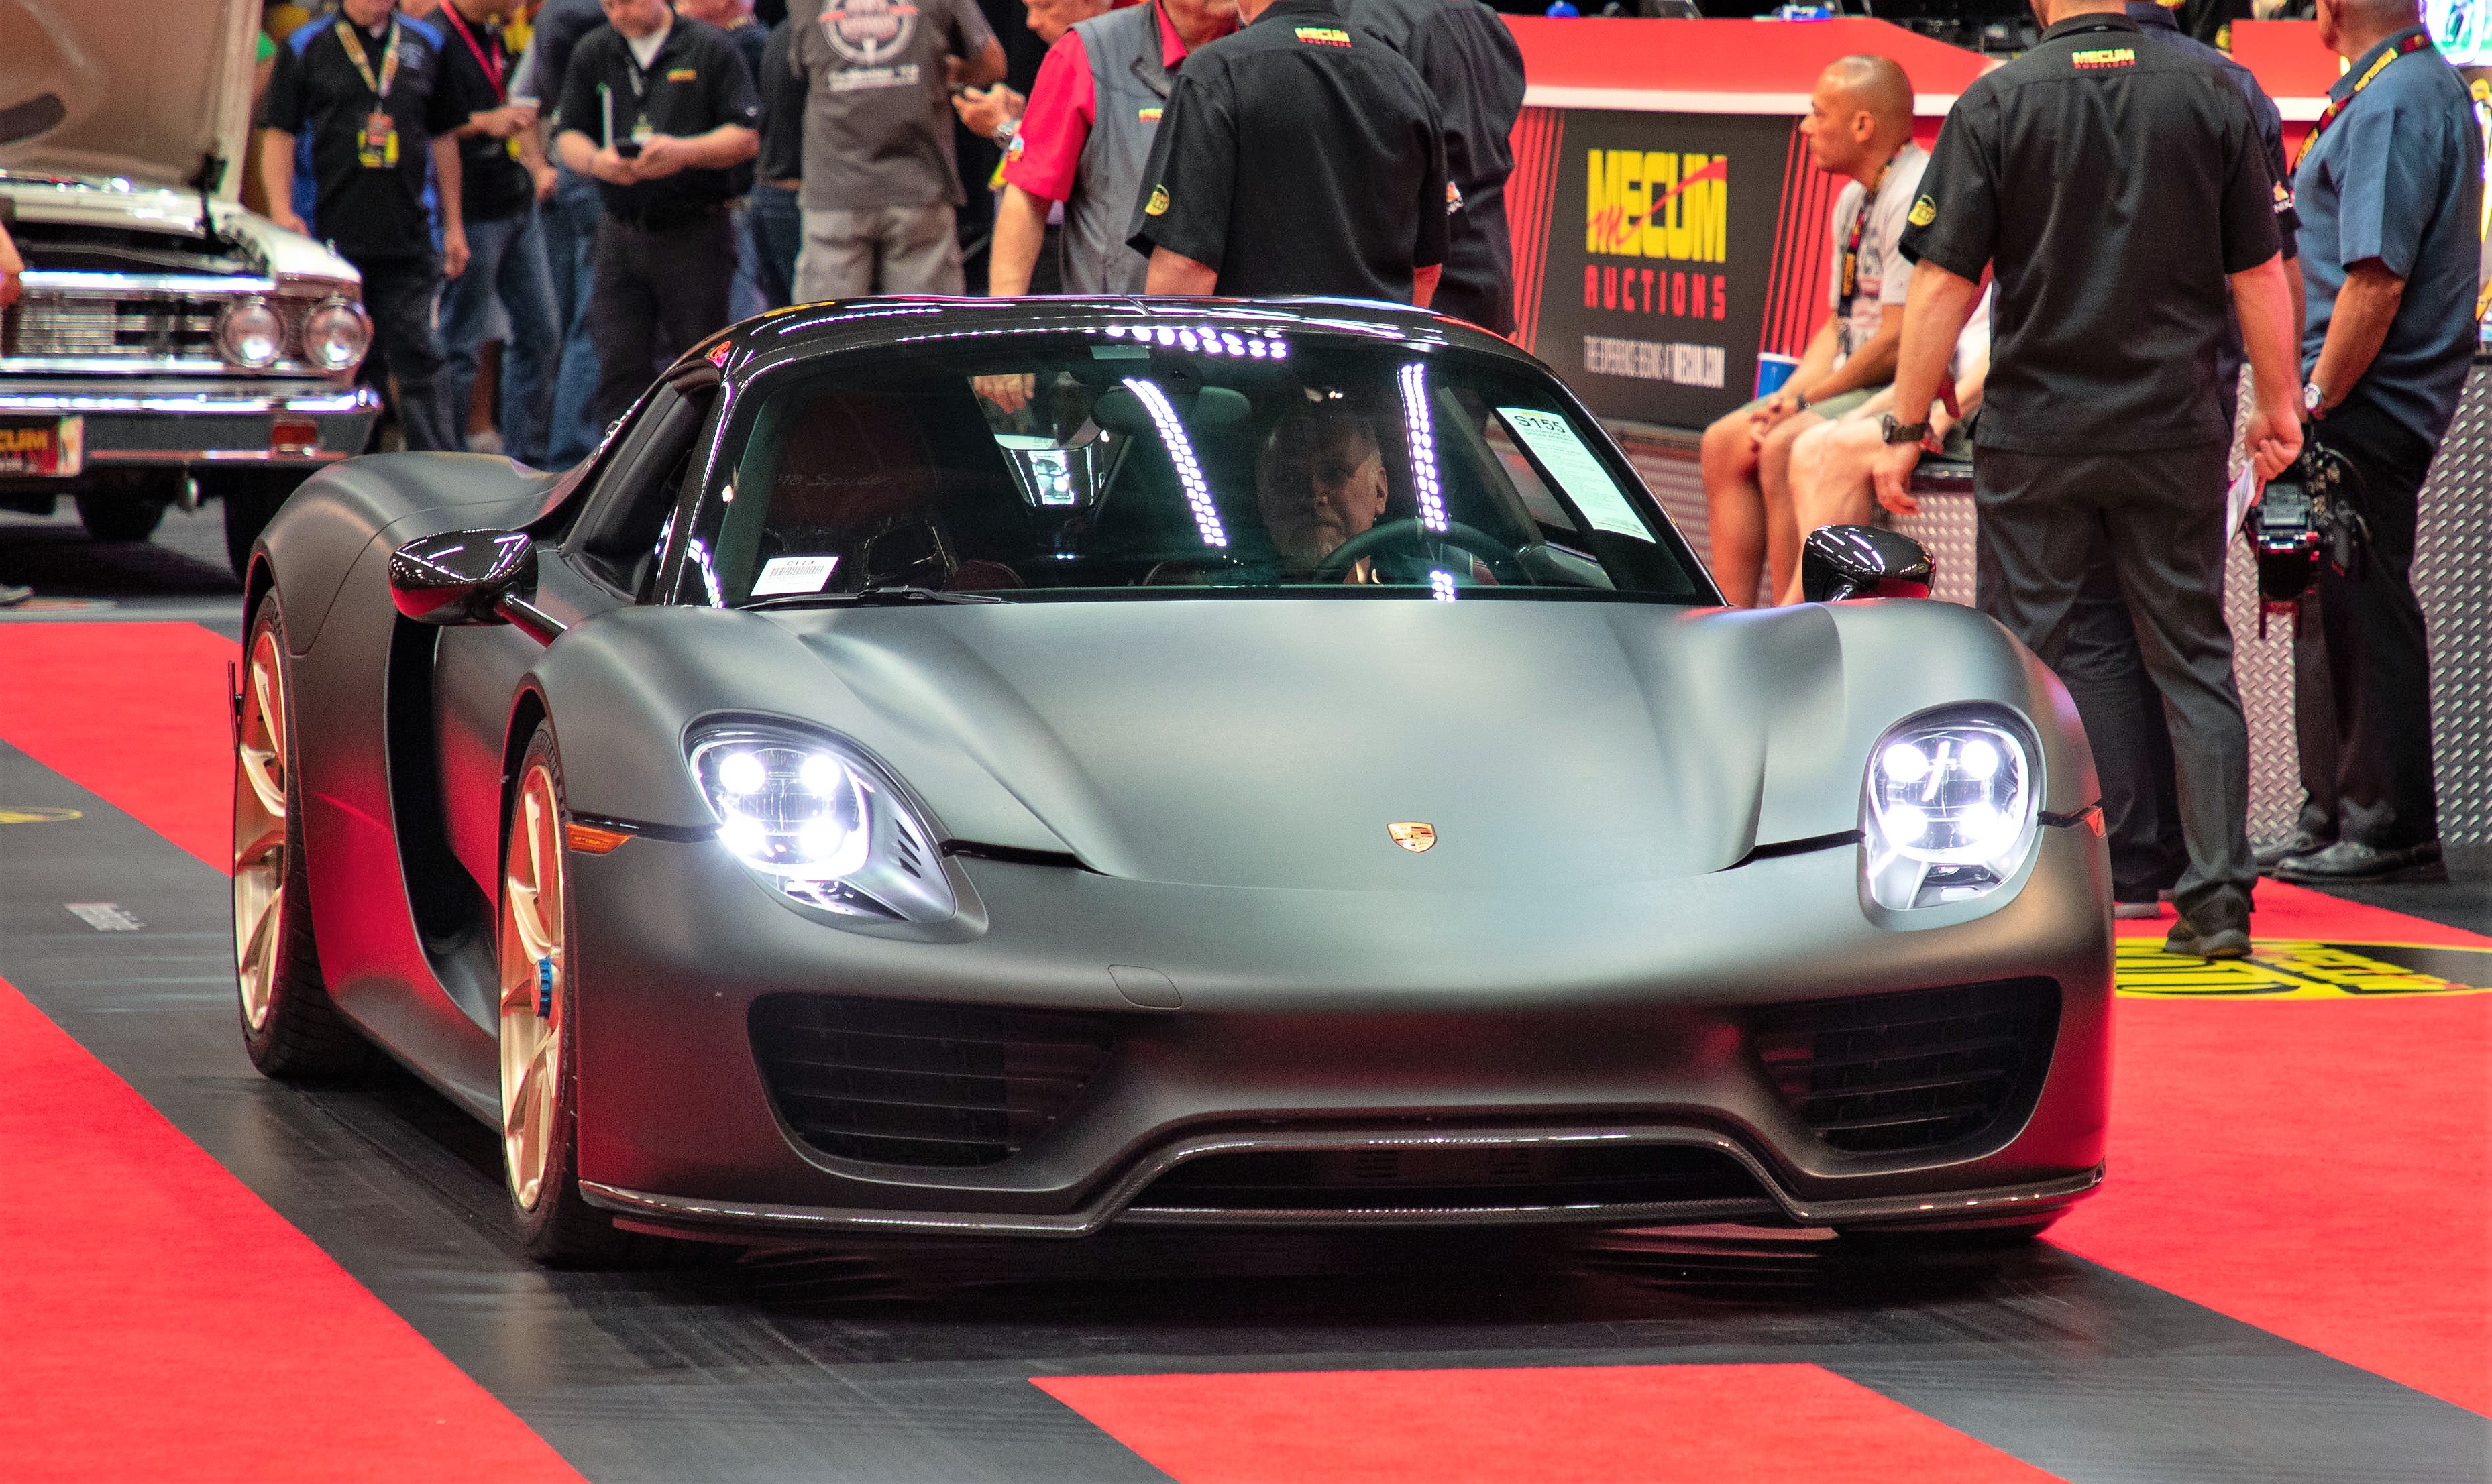 Mecum, Record results as Mecum Indy sale totals $70.4 million, ClassicCars.com Journal